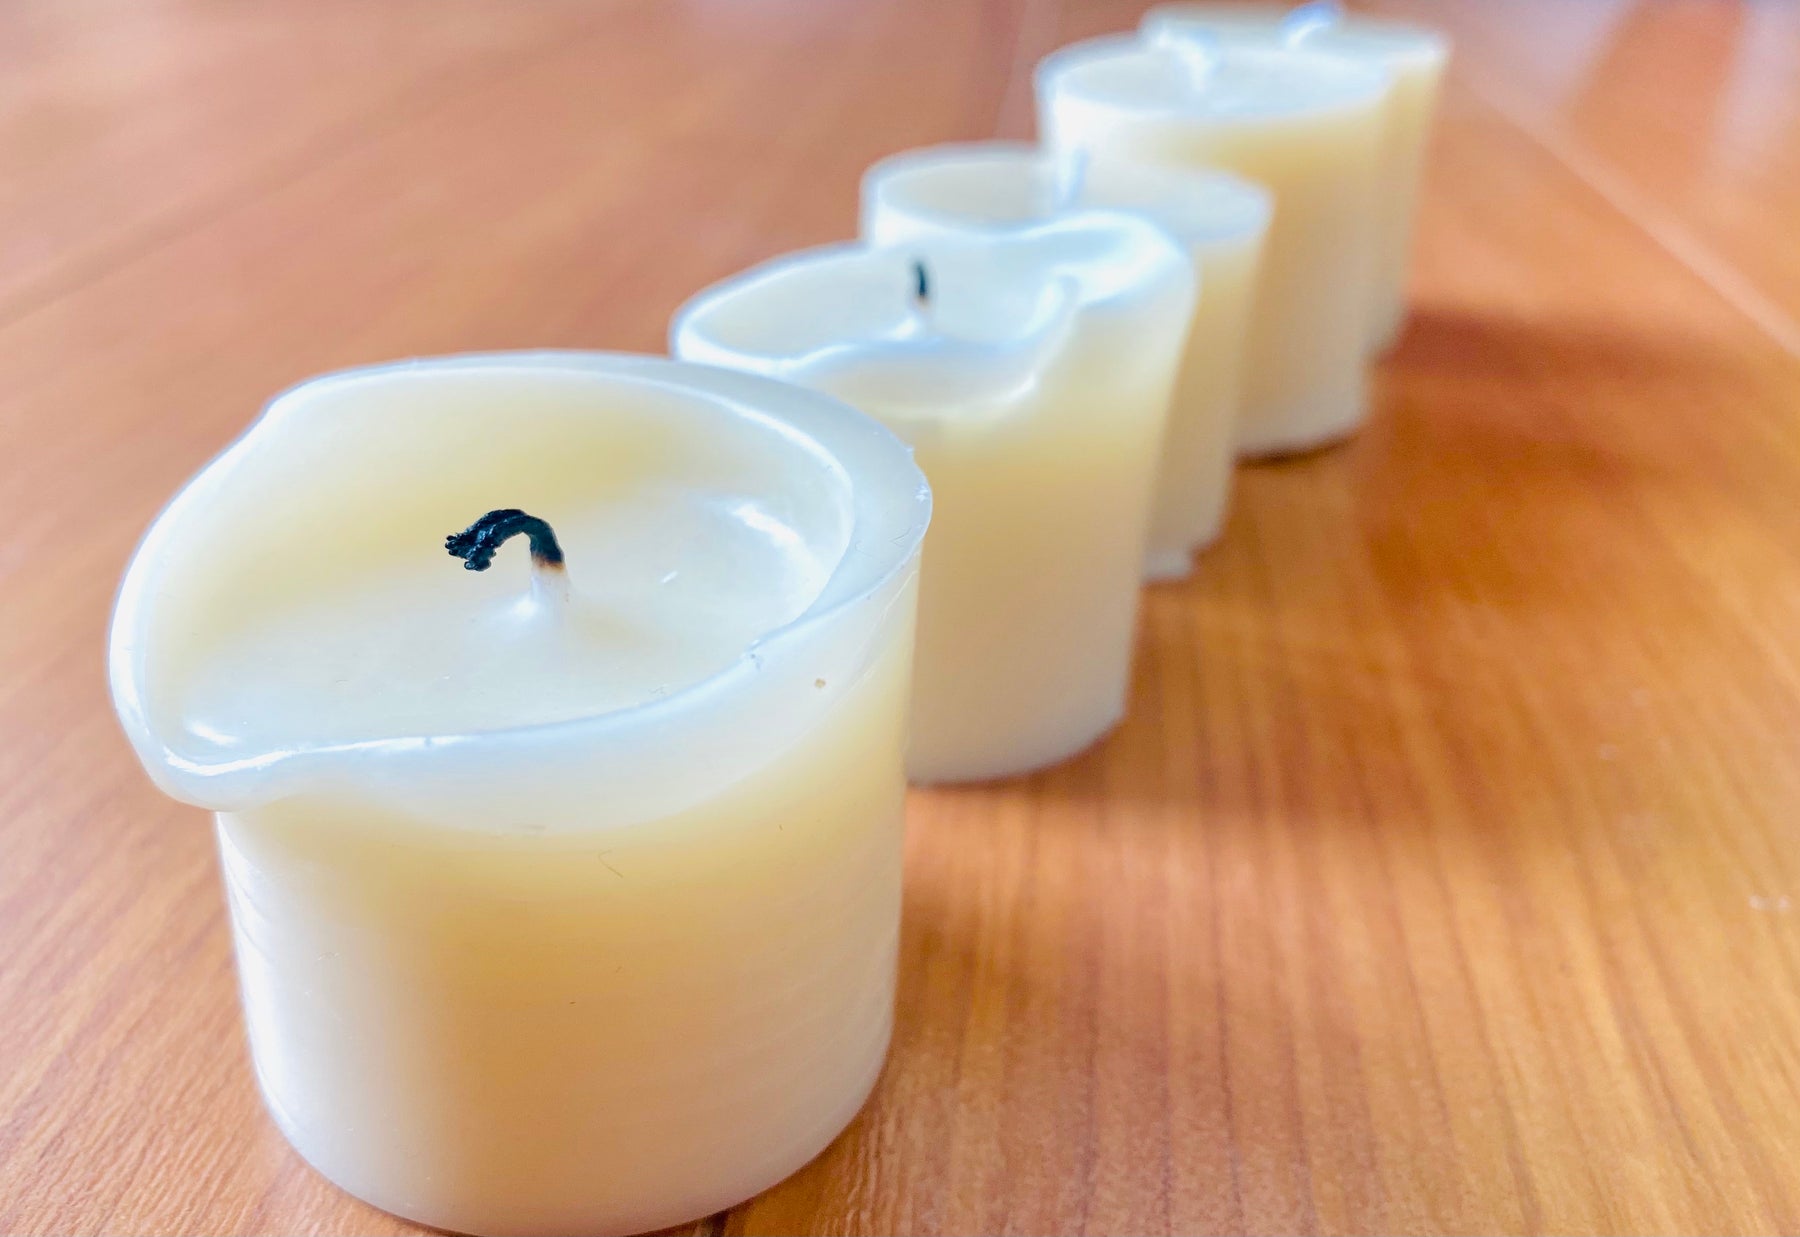 Soy Wax for Pillar Candles (Notes)